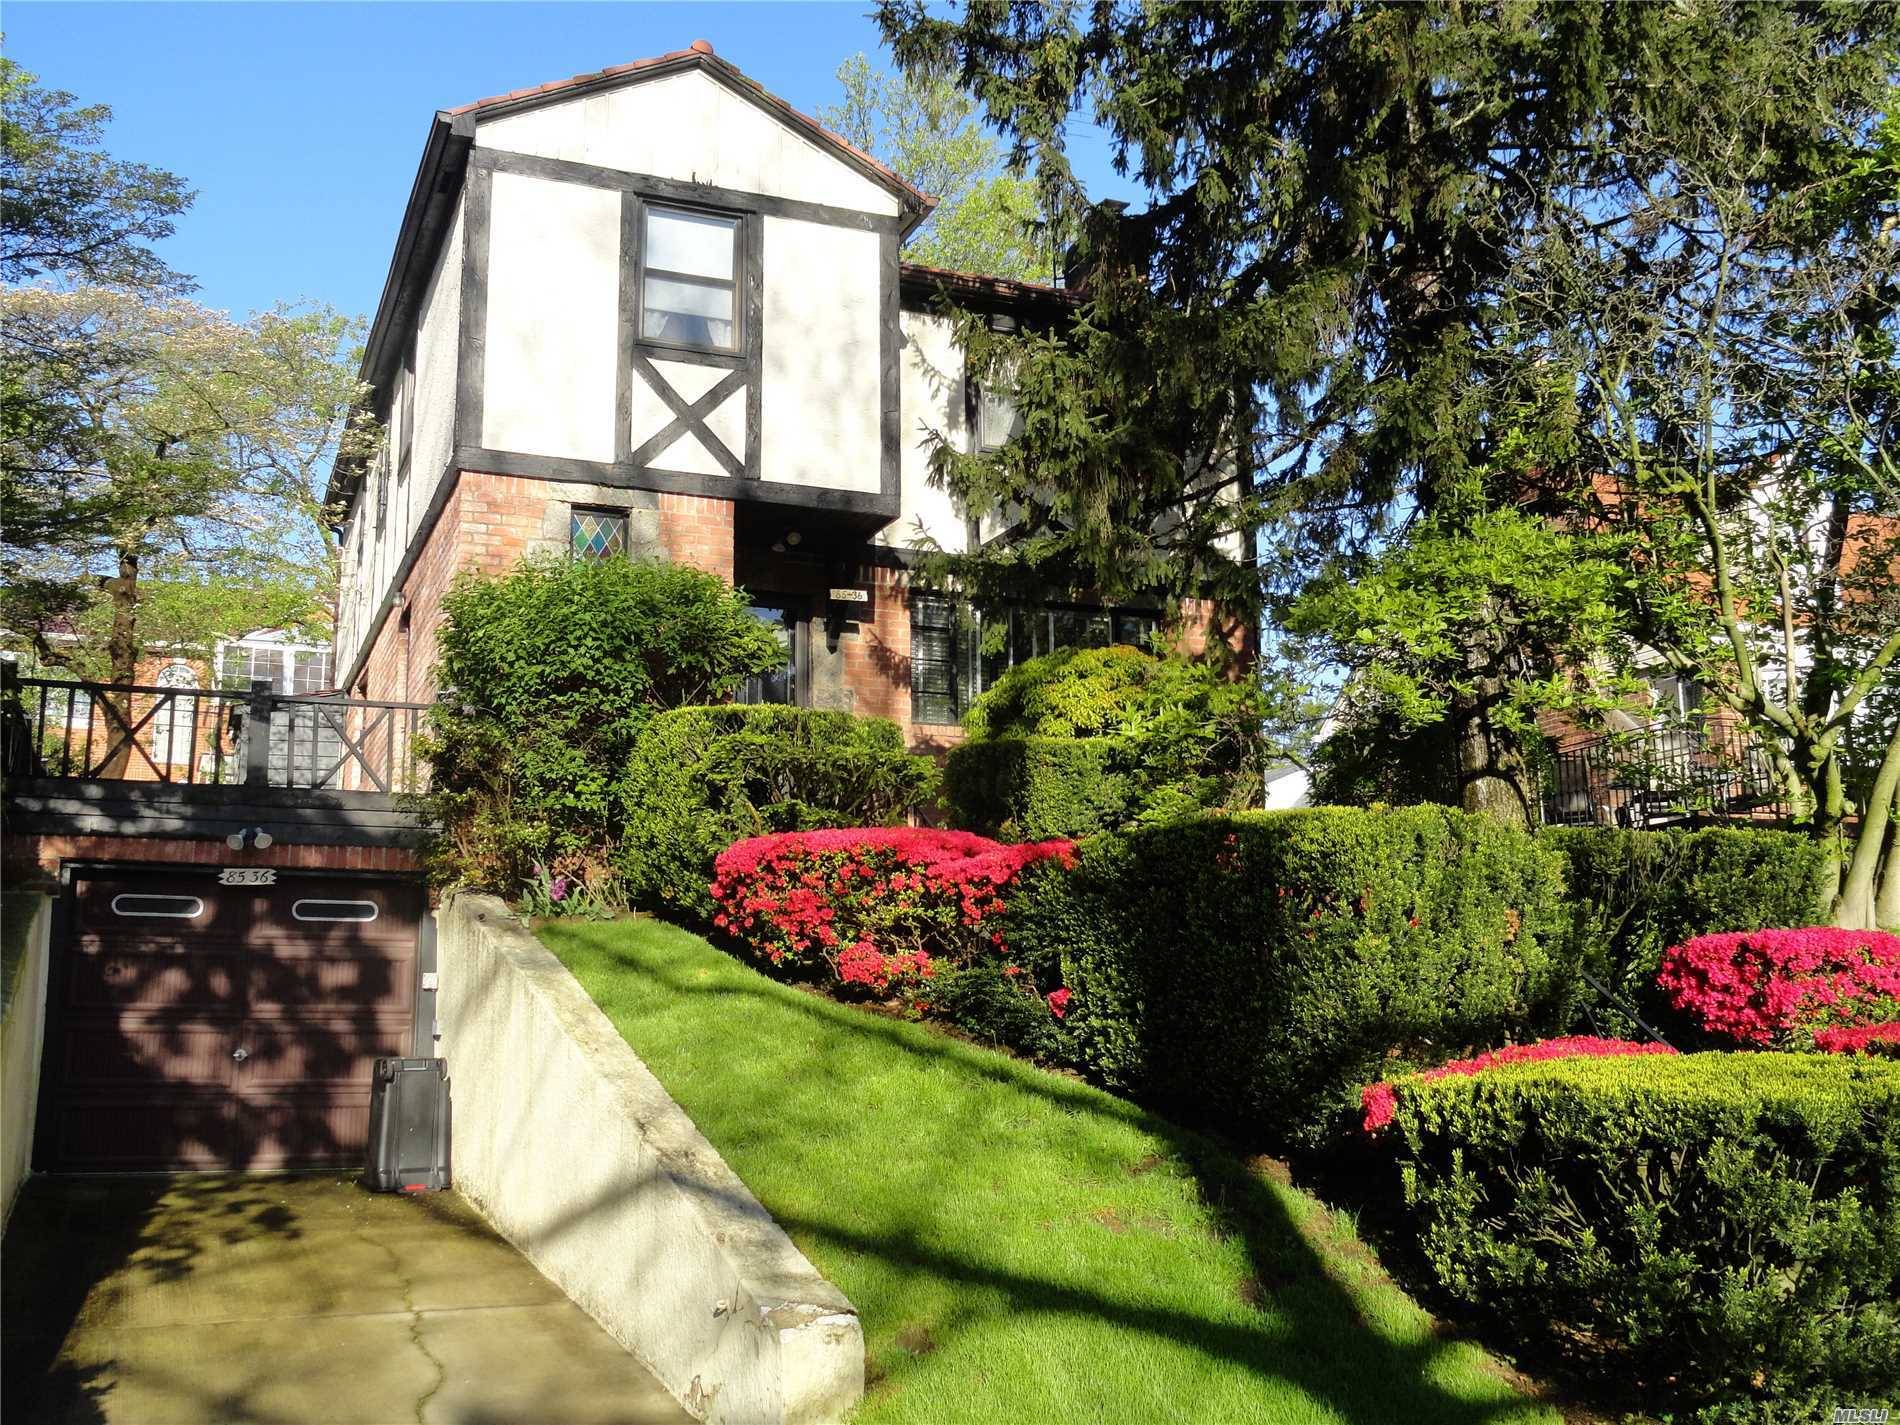 Beautiful, elegant, bright, airy Tudor home with commanding views and inviting layouts.